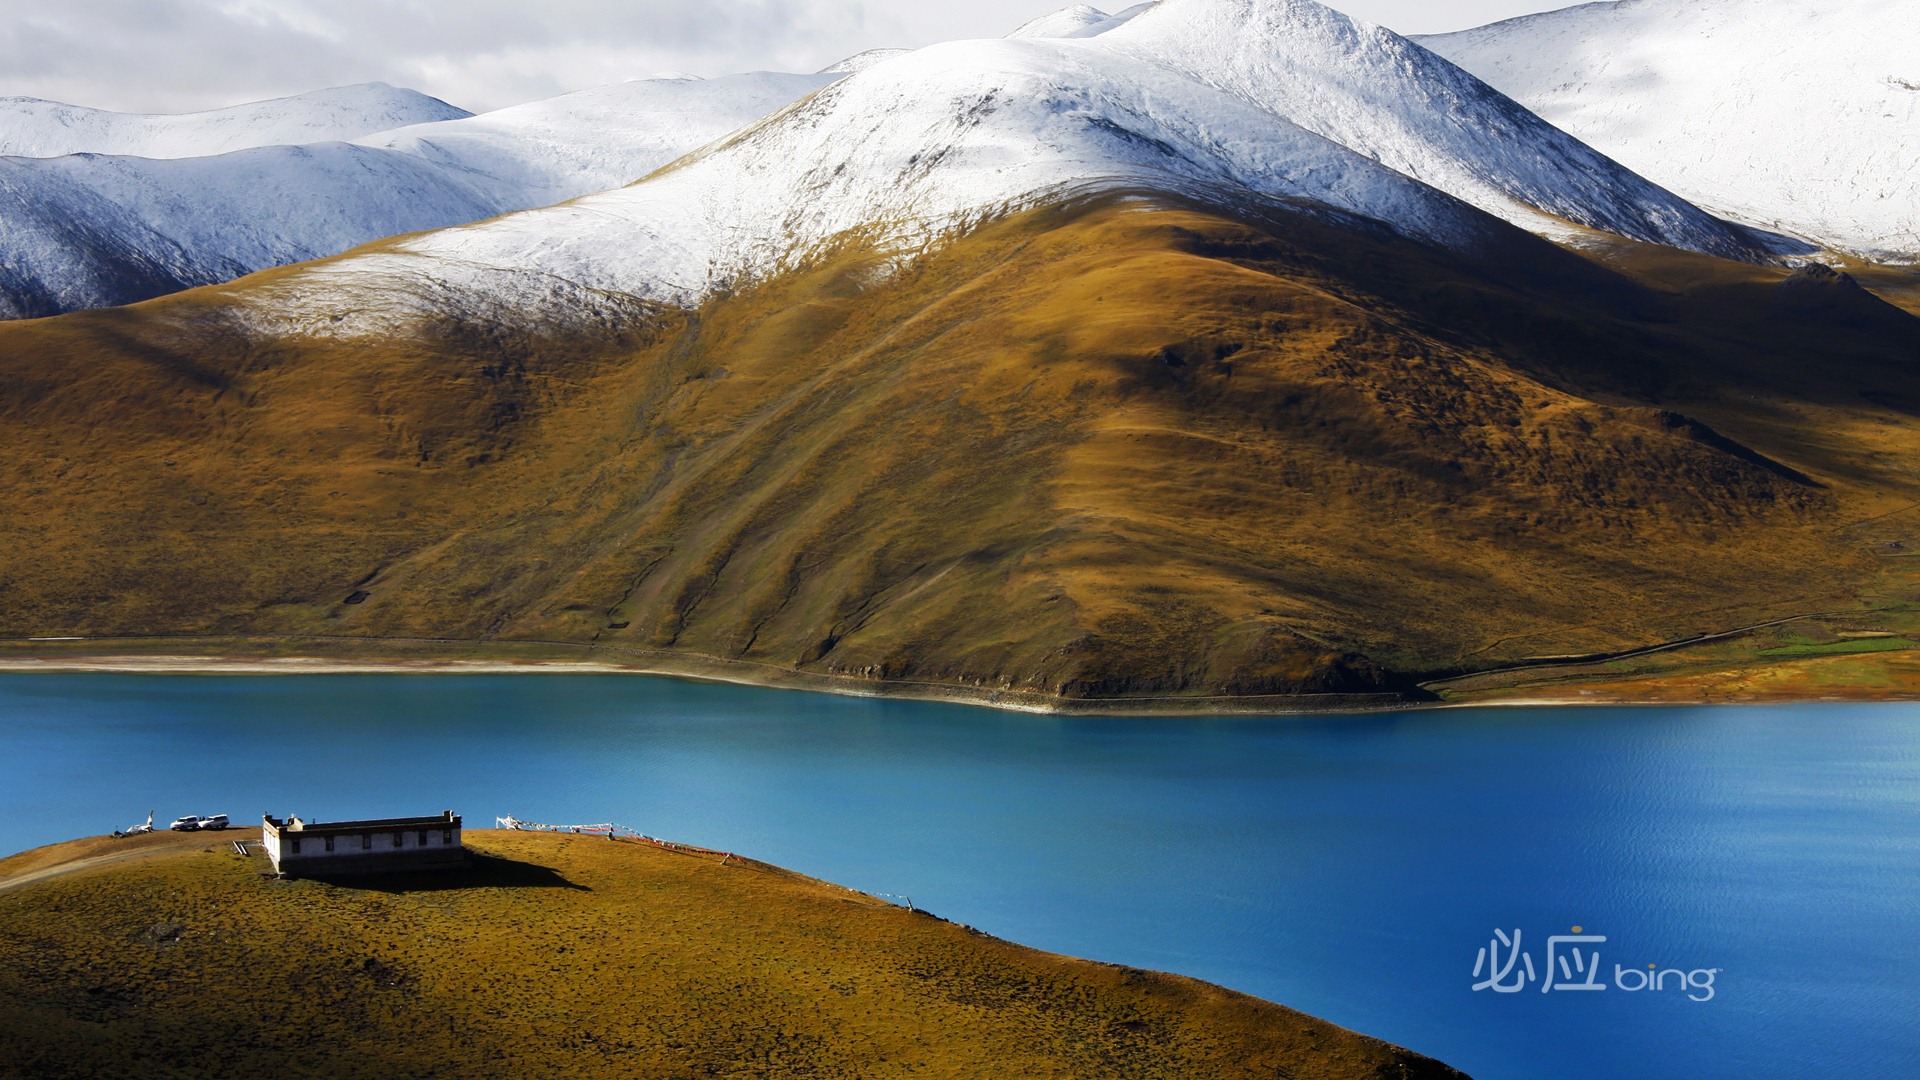 Best of Bing Wallpapers: China #14 - 1920x1080